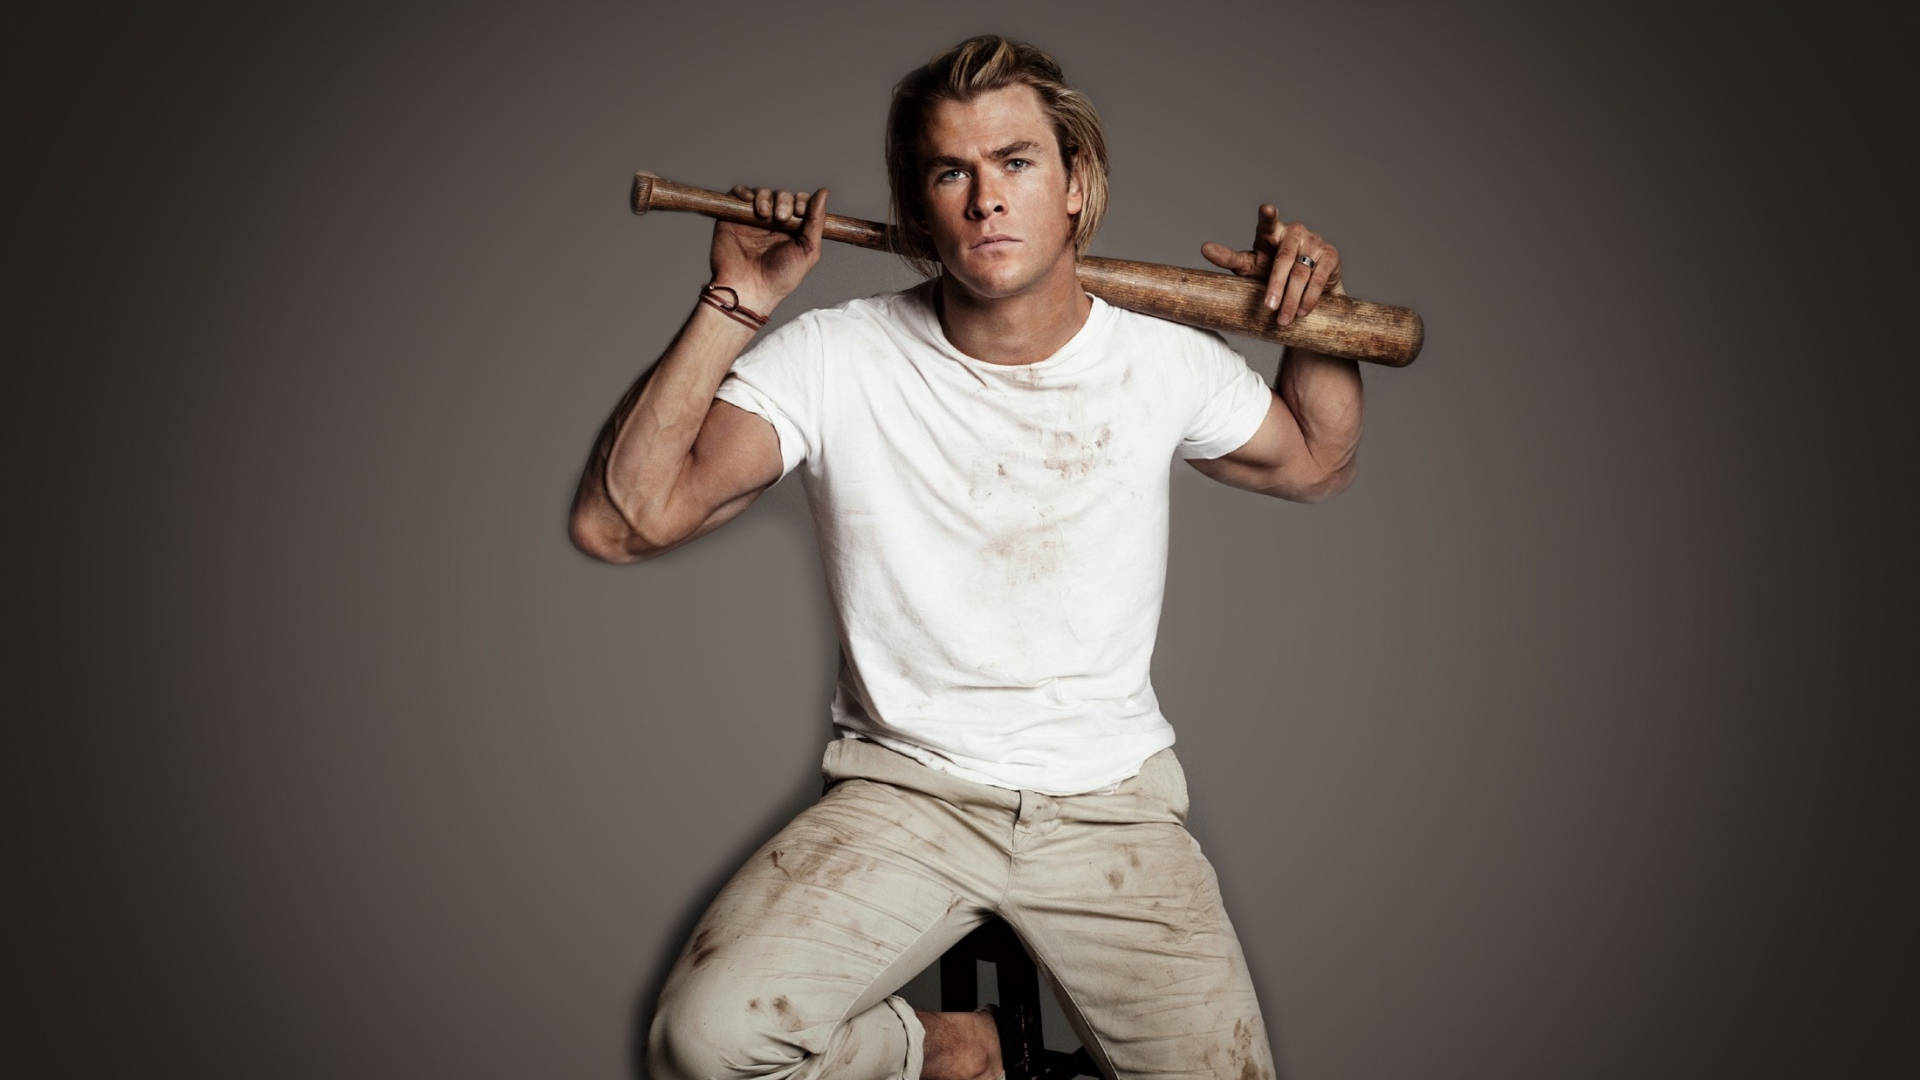 Chris Hemsworth, Star Of Thor And The Avengers Series, Holds A Bat.